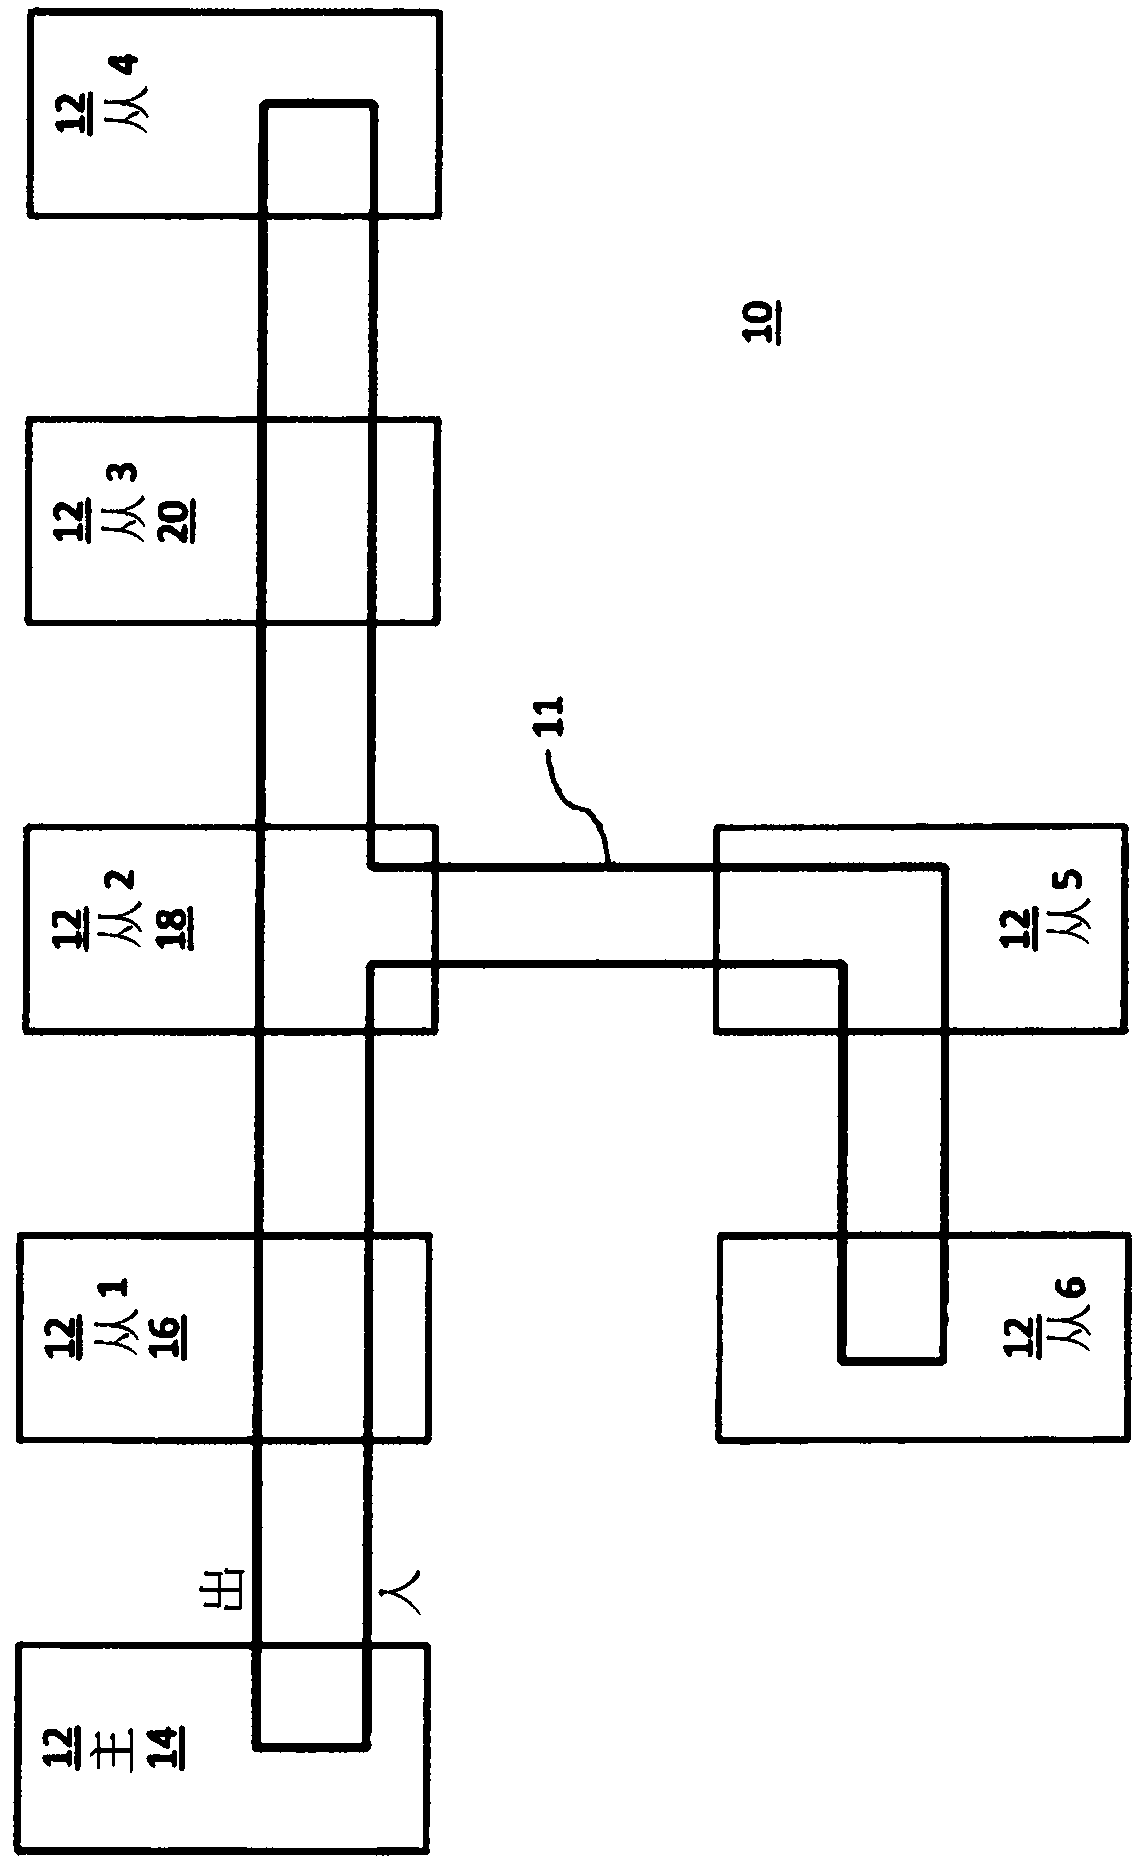 Method for operating communication network, communication network, controller, and data processing device